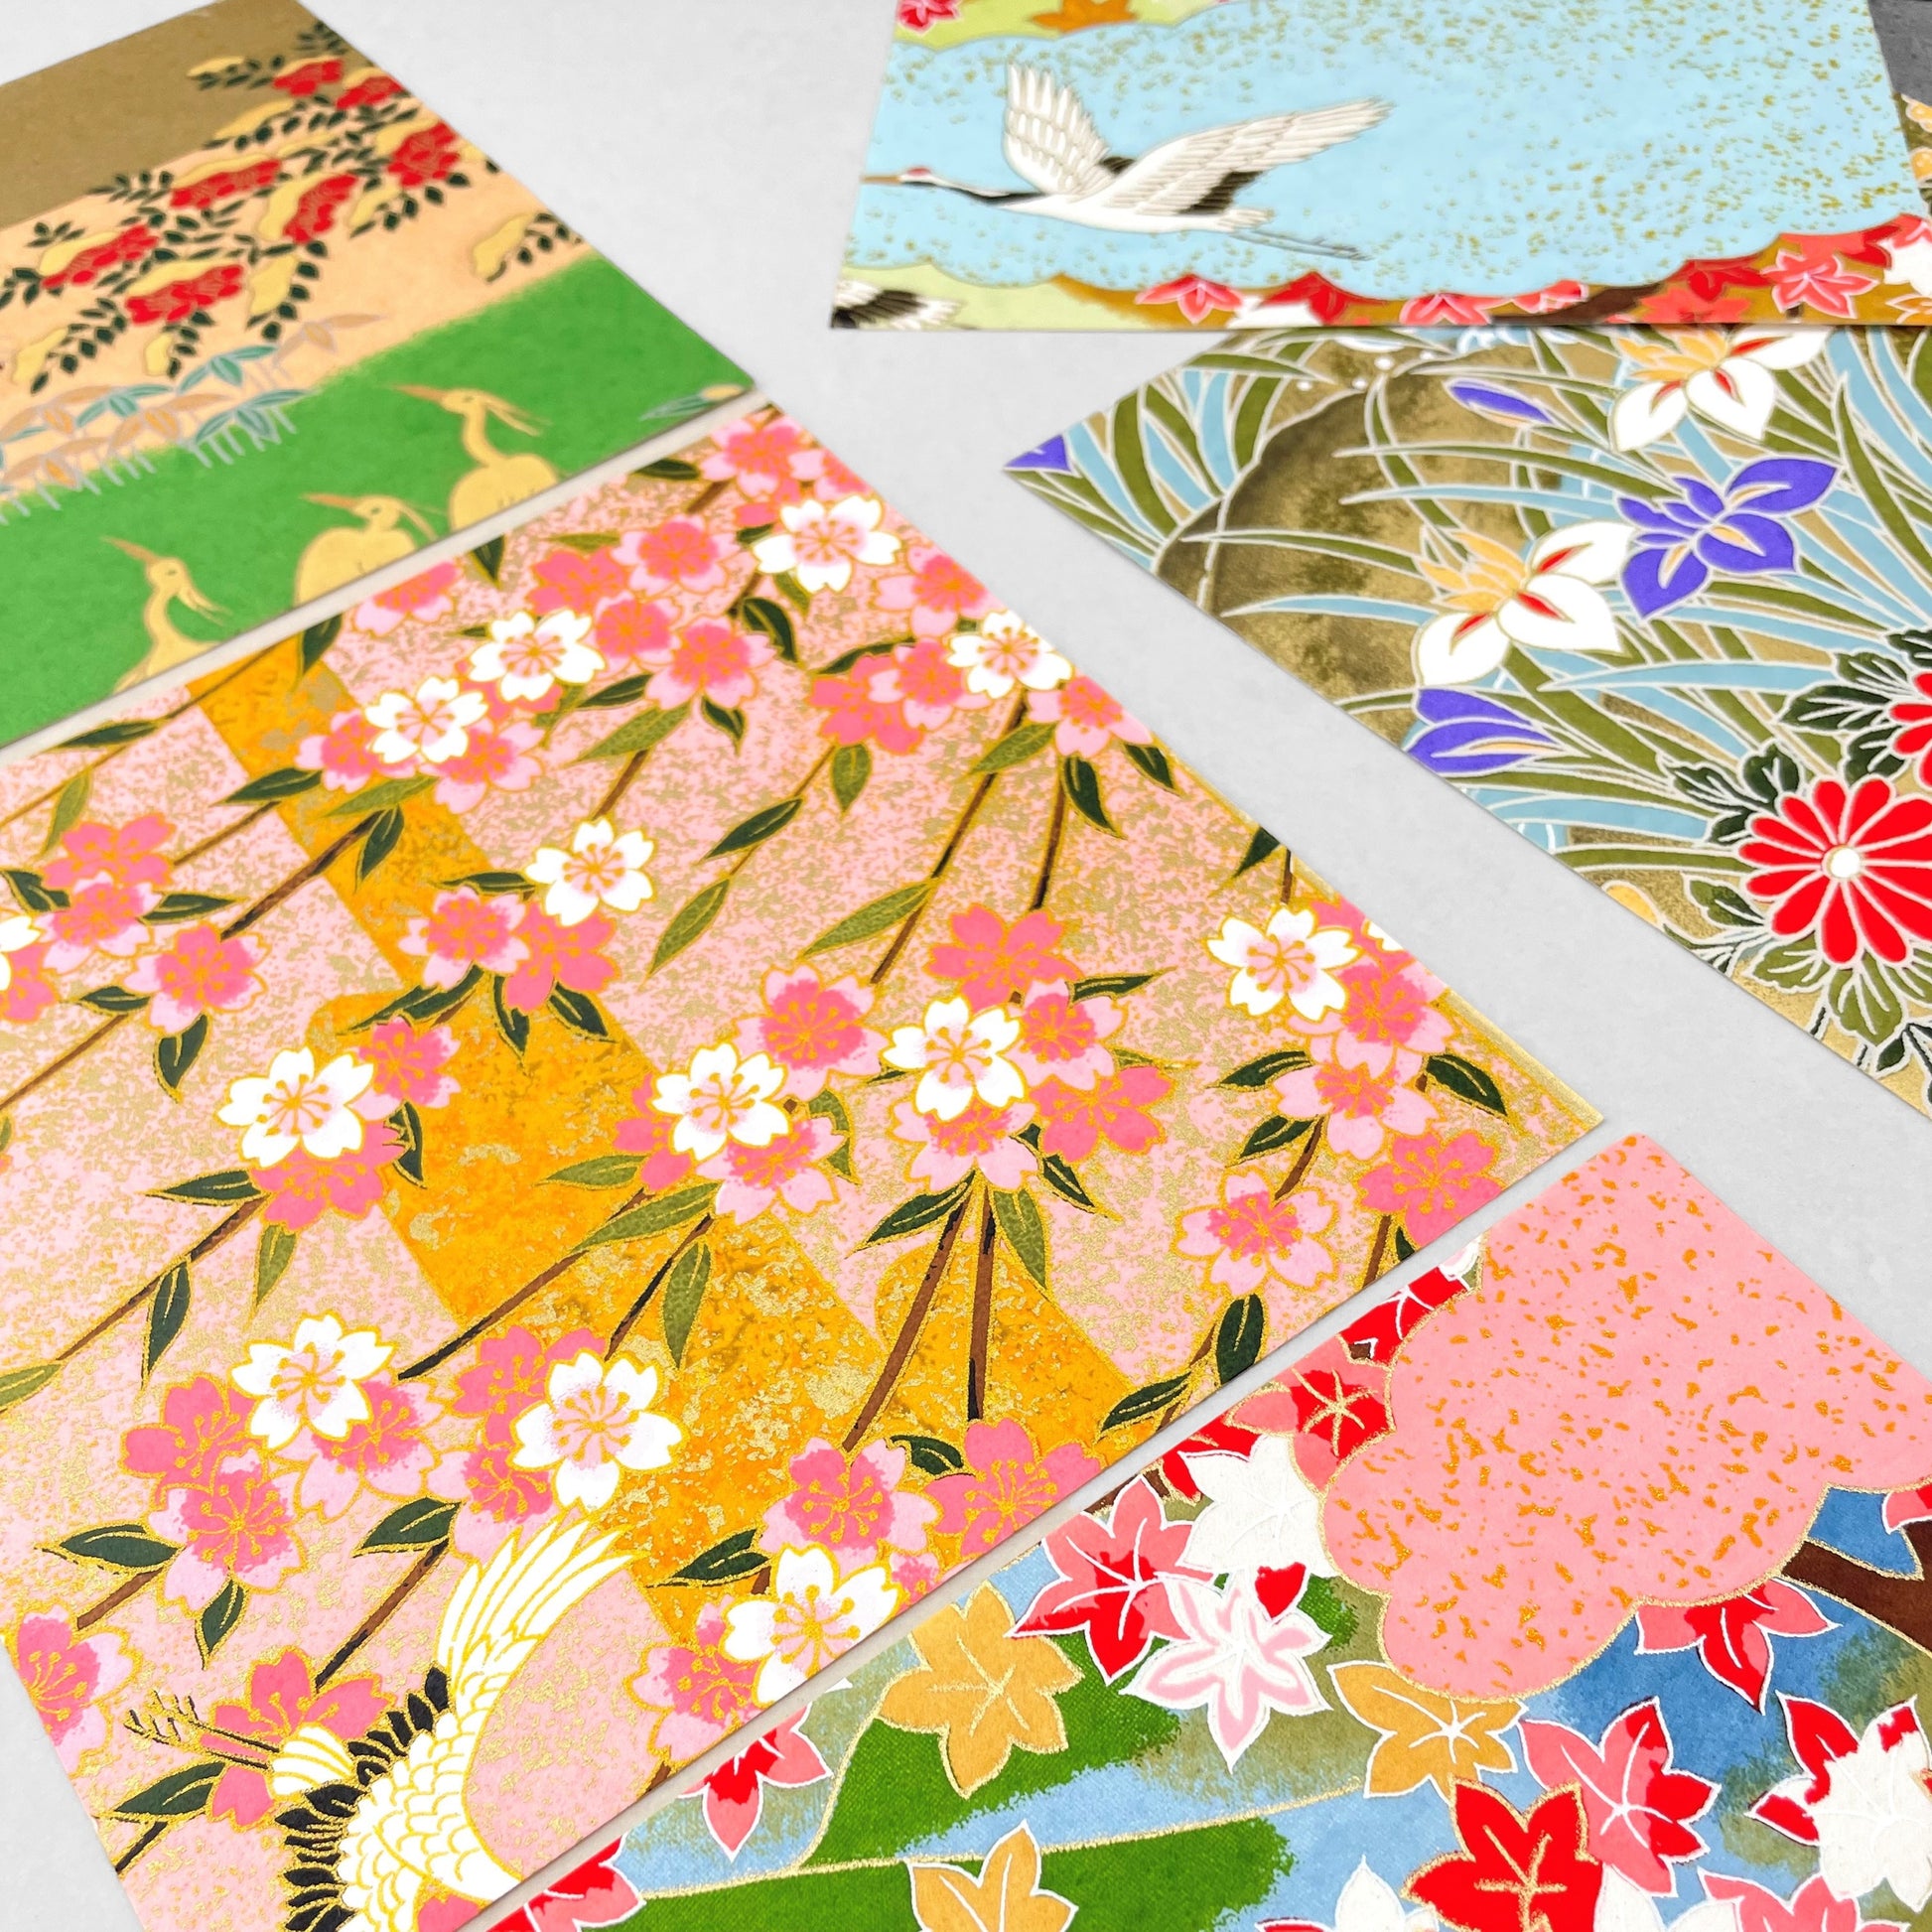 pack of silkscreen origami patterned papers by Esmie